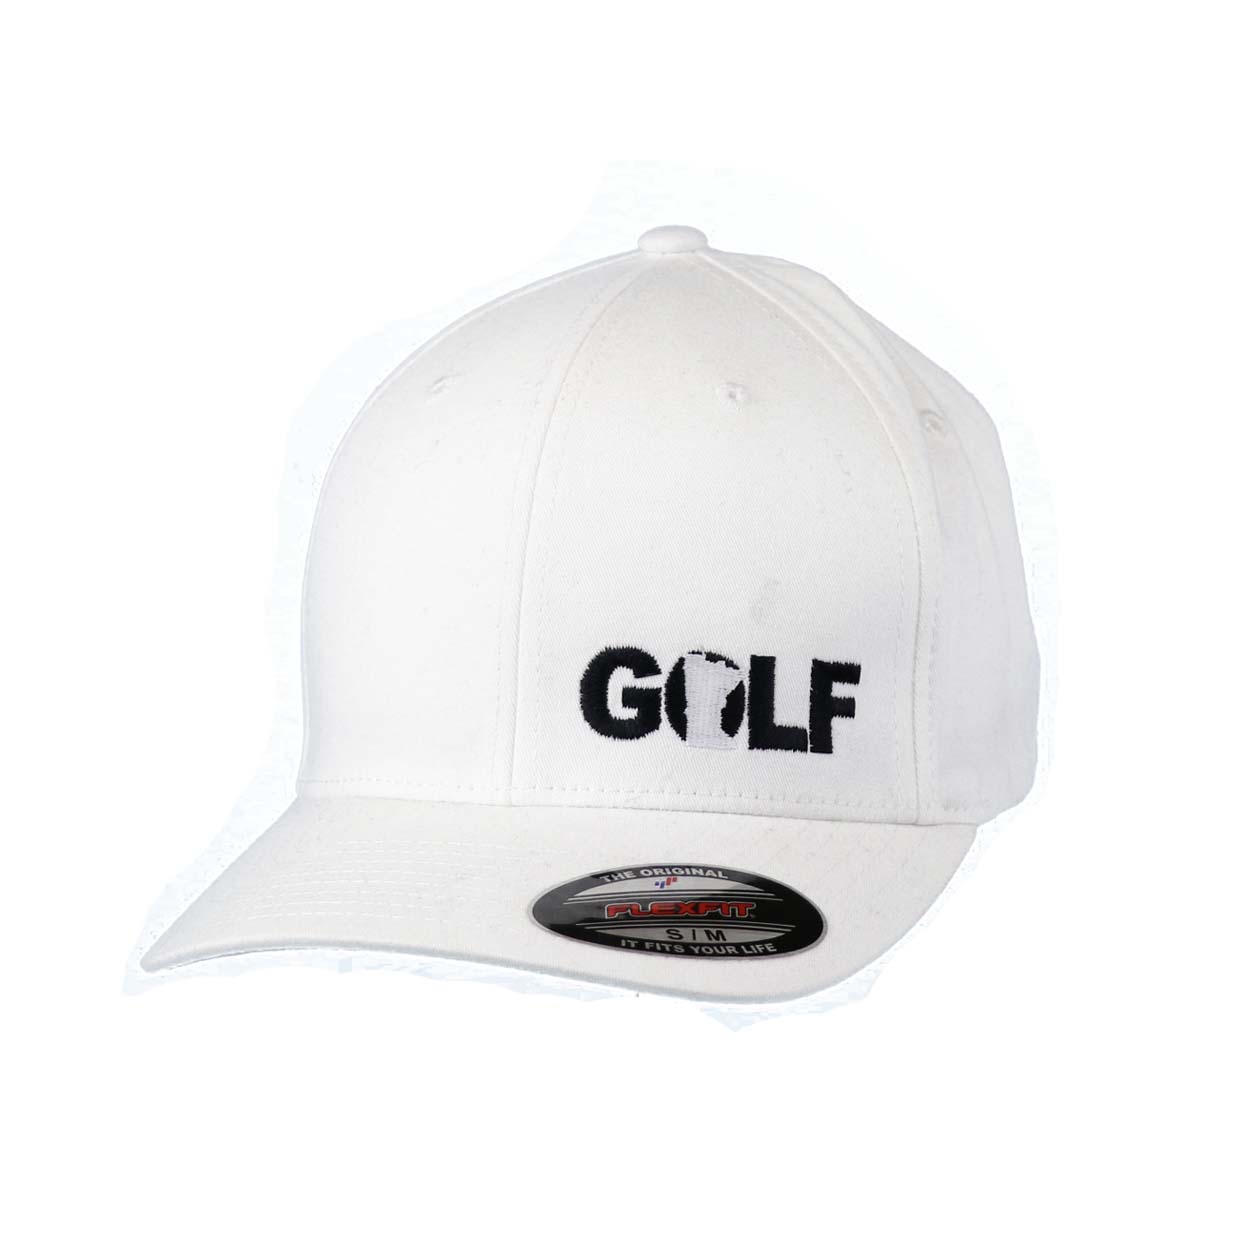 Golf Minnesota Night Out Pro Embroidered Flex Fit Trucker Hat White/Black